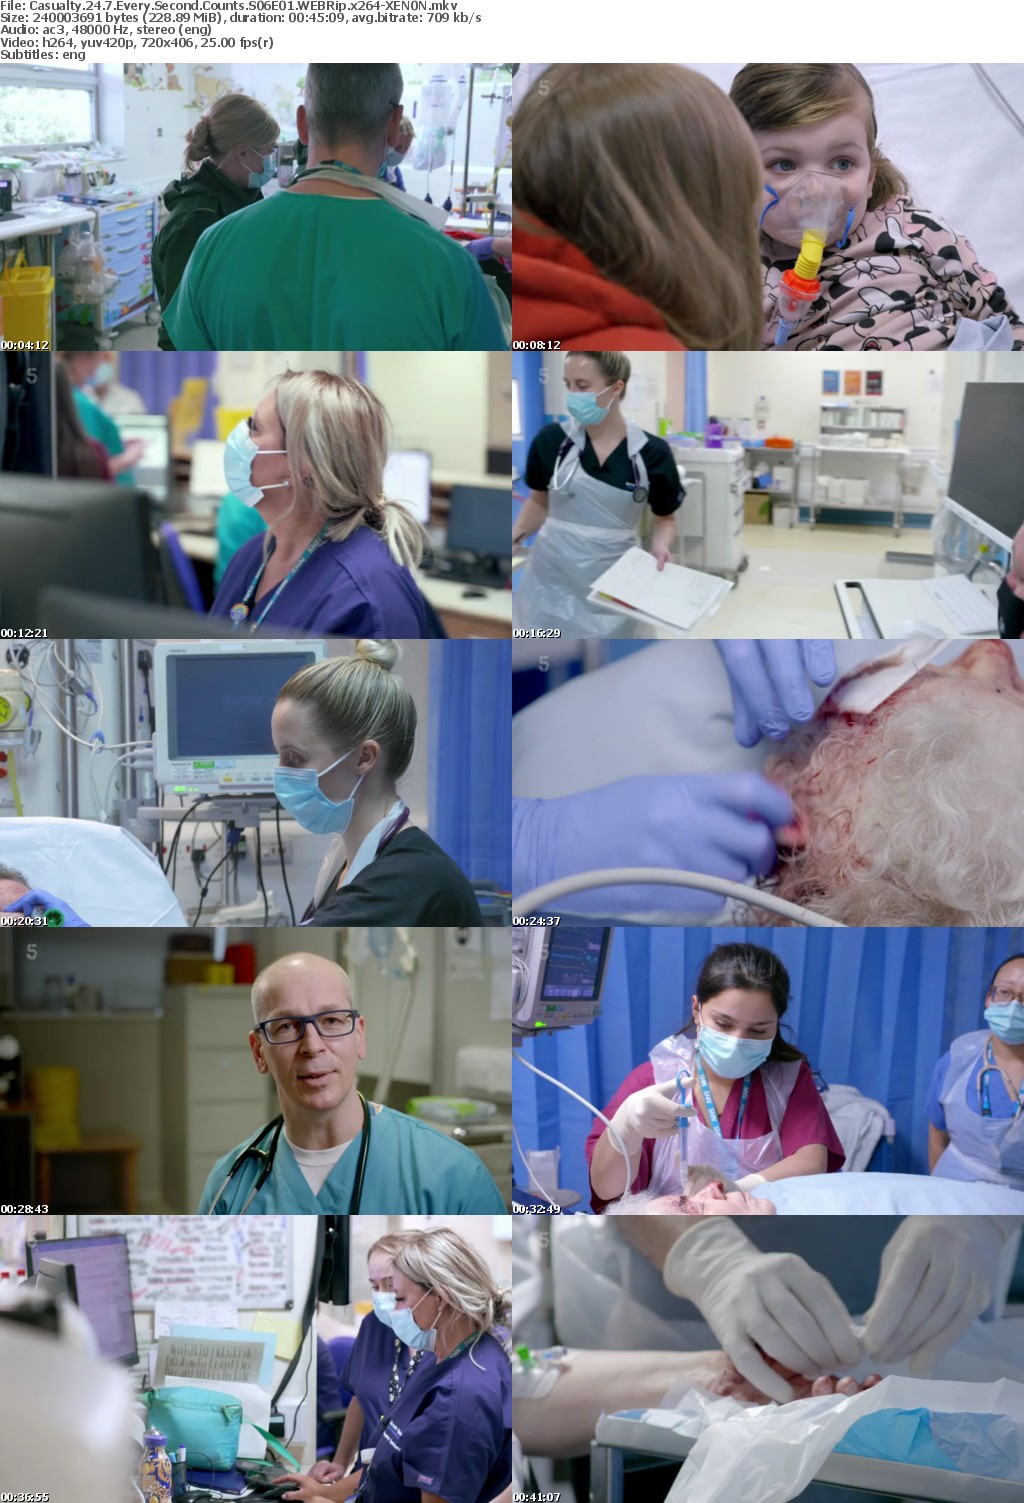 Casualty 24 7 Every Second Counts S06E01 WEBRip x264-XEN0N